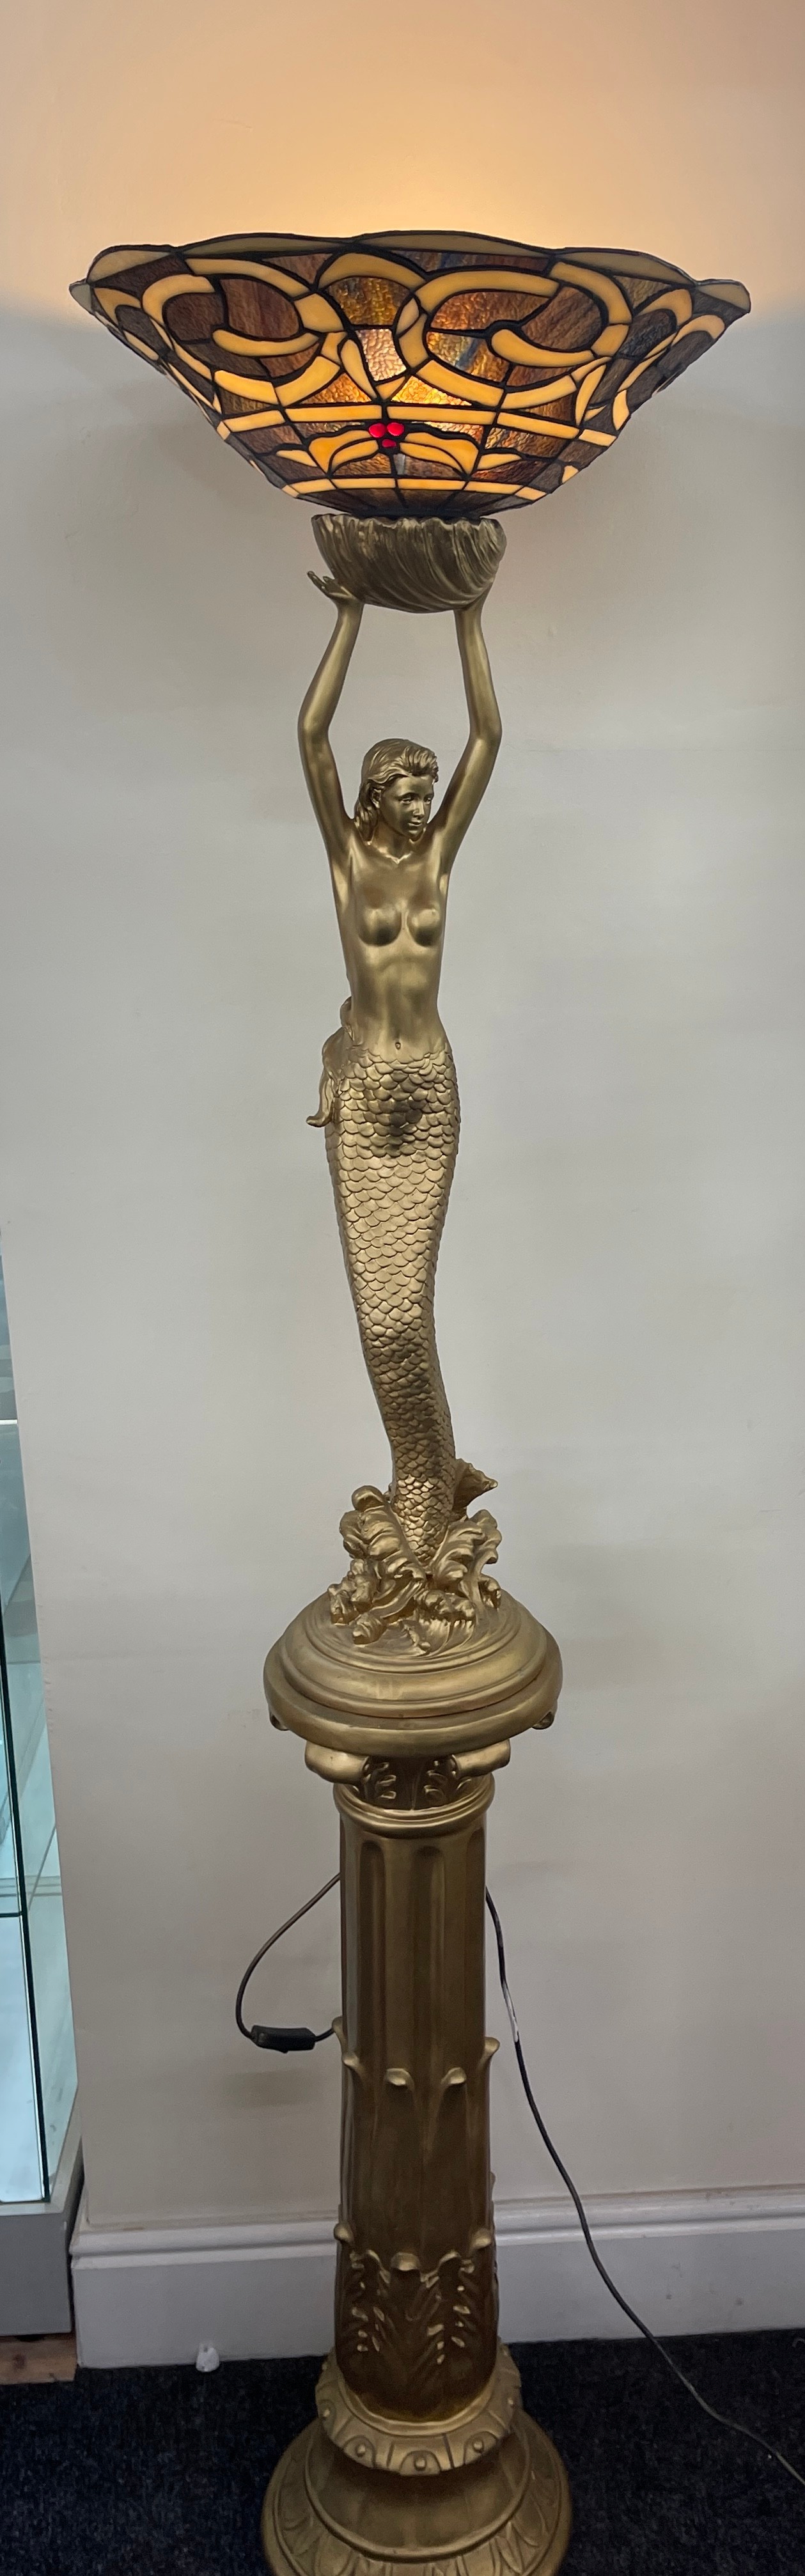 Tall mermaid resin lamp on plinth, approximately 75.5 inches tall, working order with glass shade